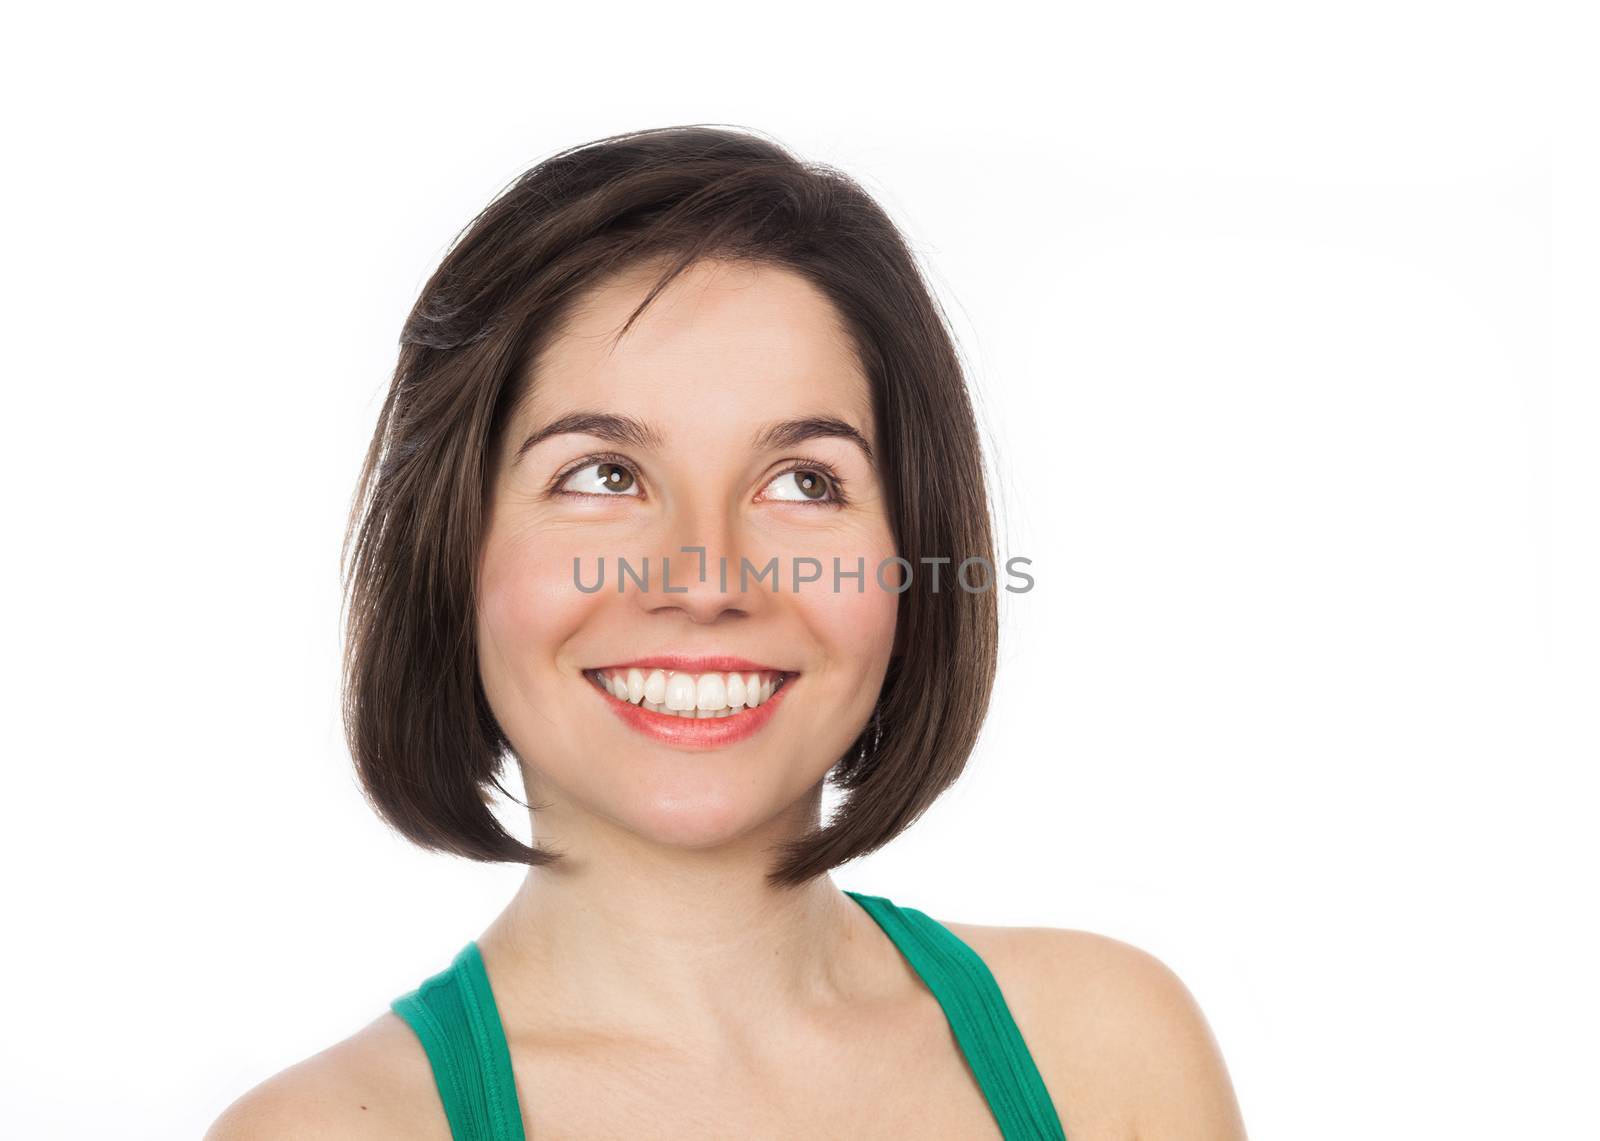 Close-up portrait of a young smiling woman looking up, isolated on white